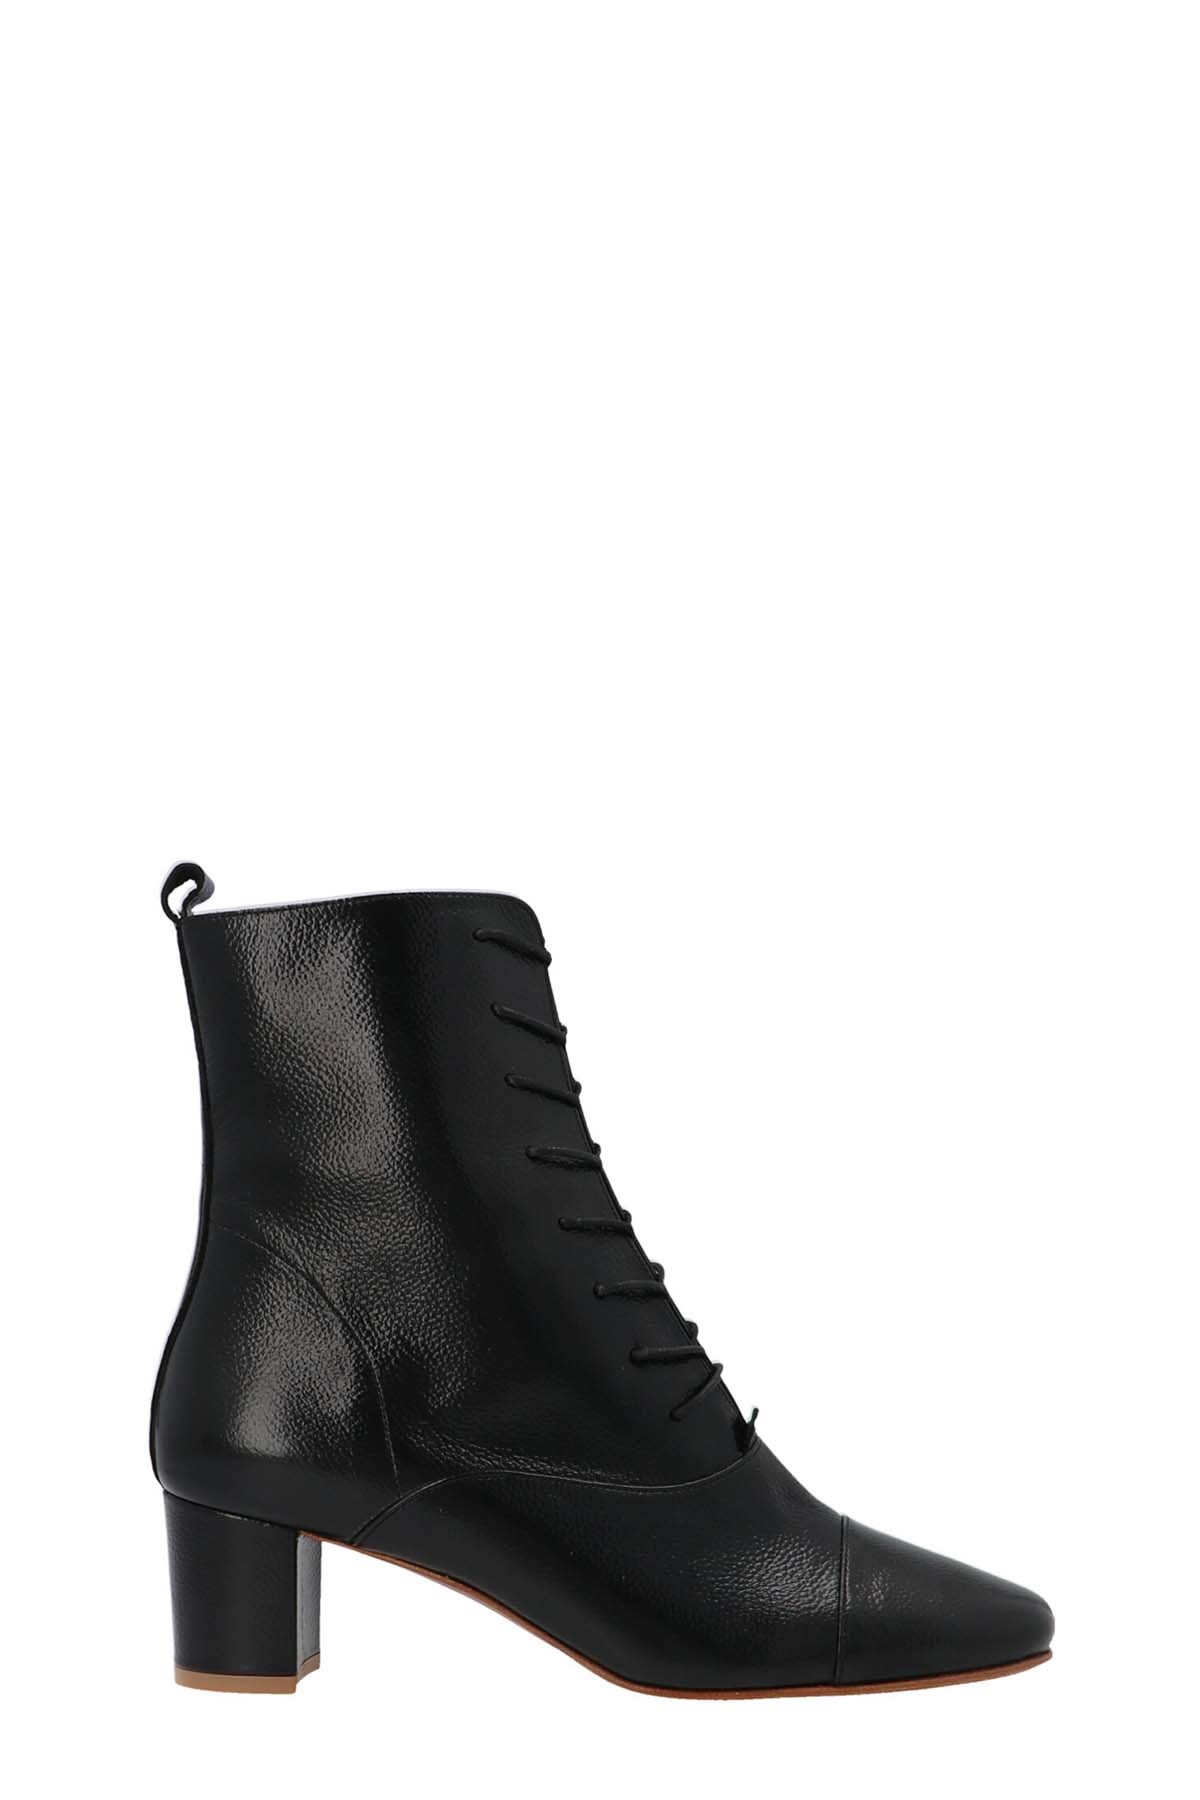 BY FAR 'Leda’ Ankle Boots